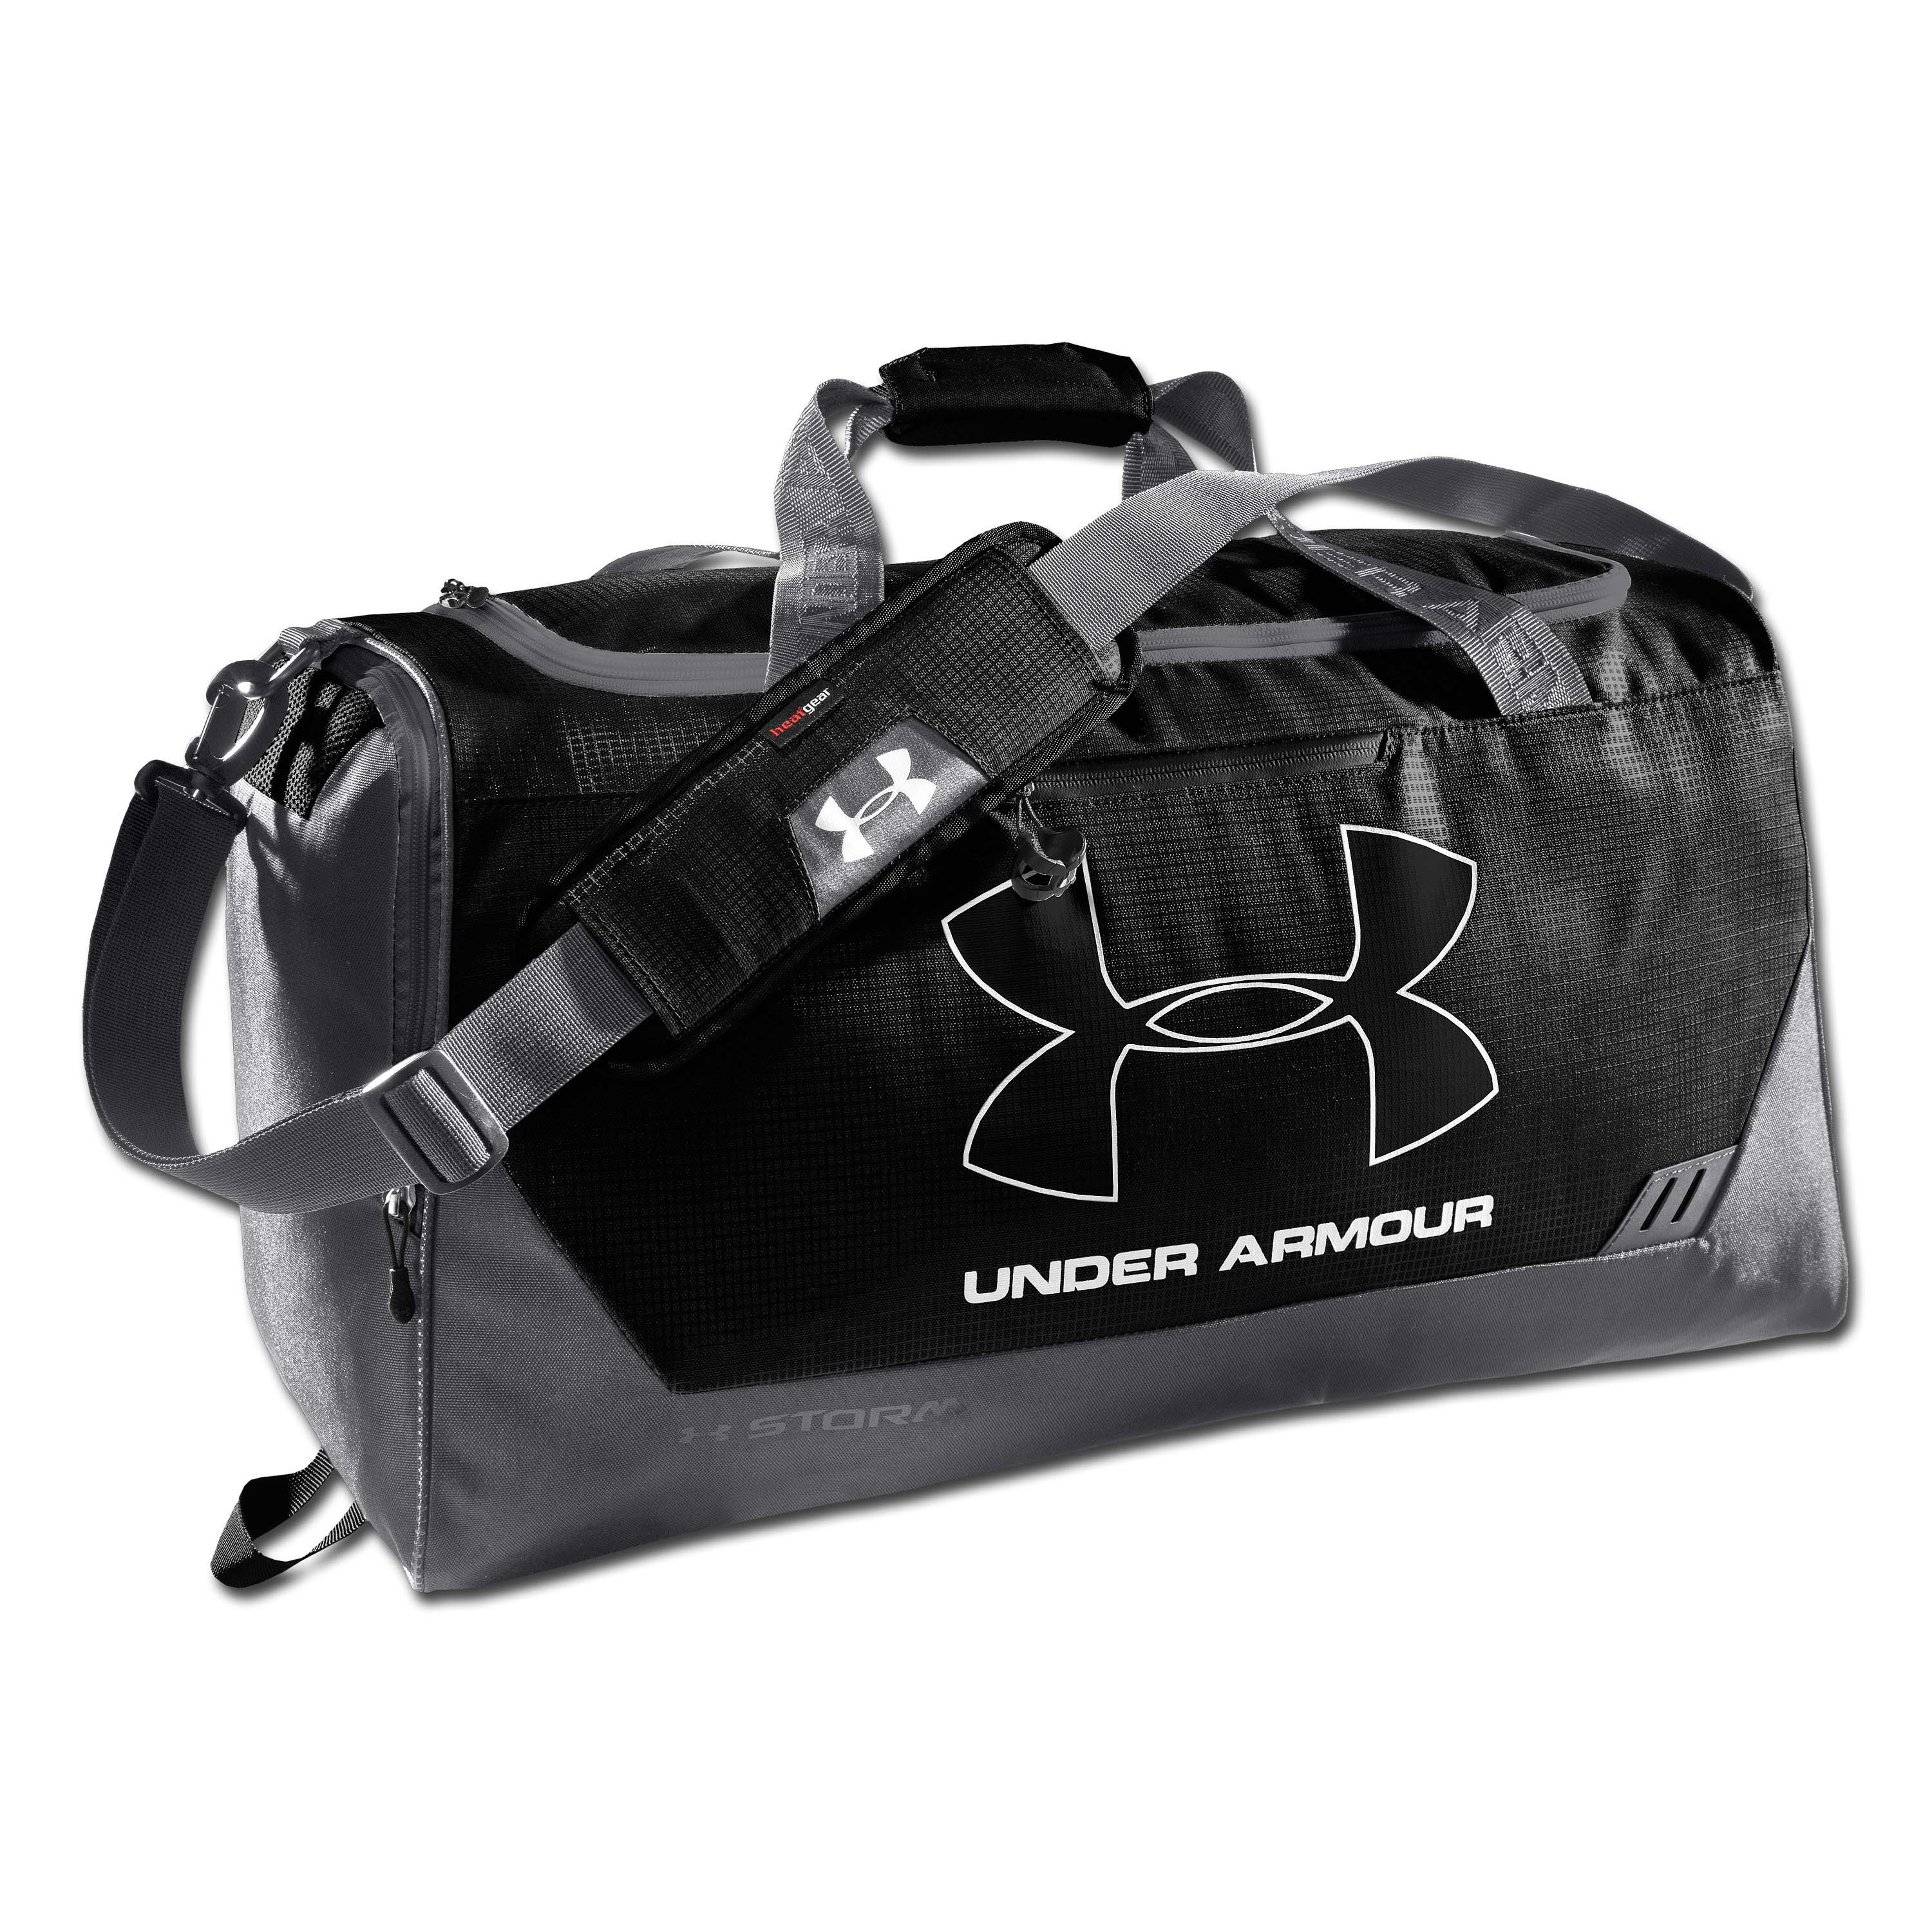 Under armour duffle